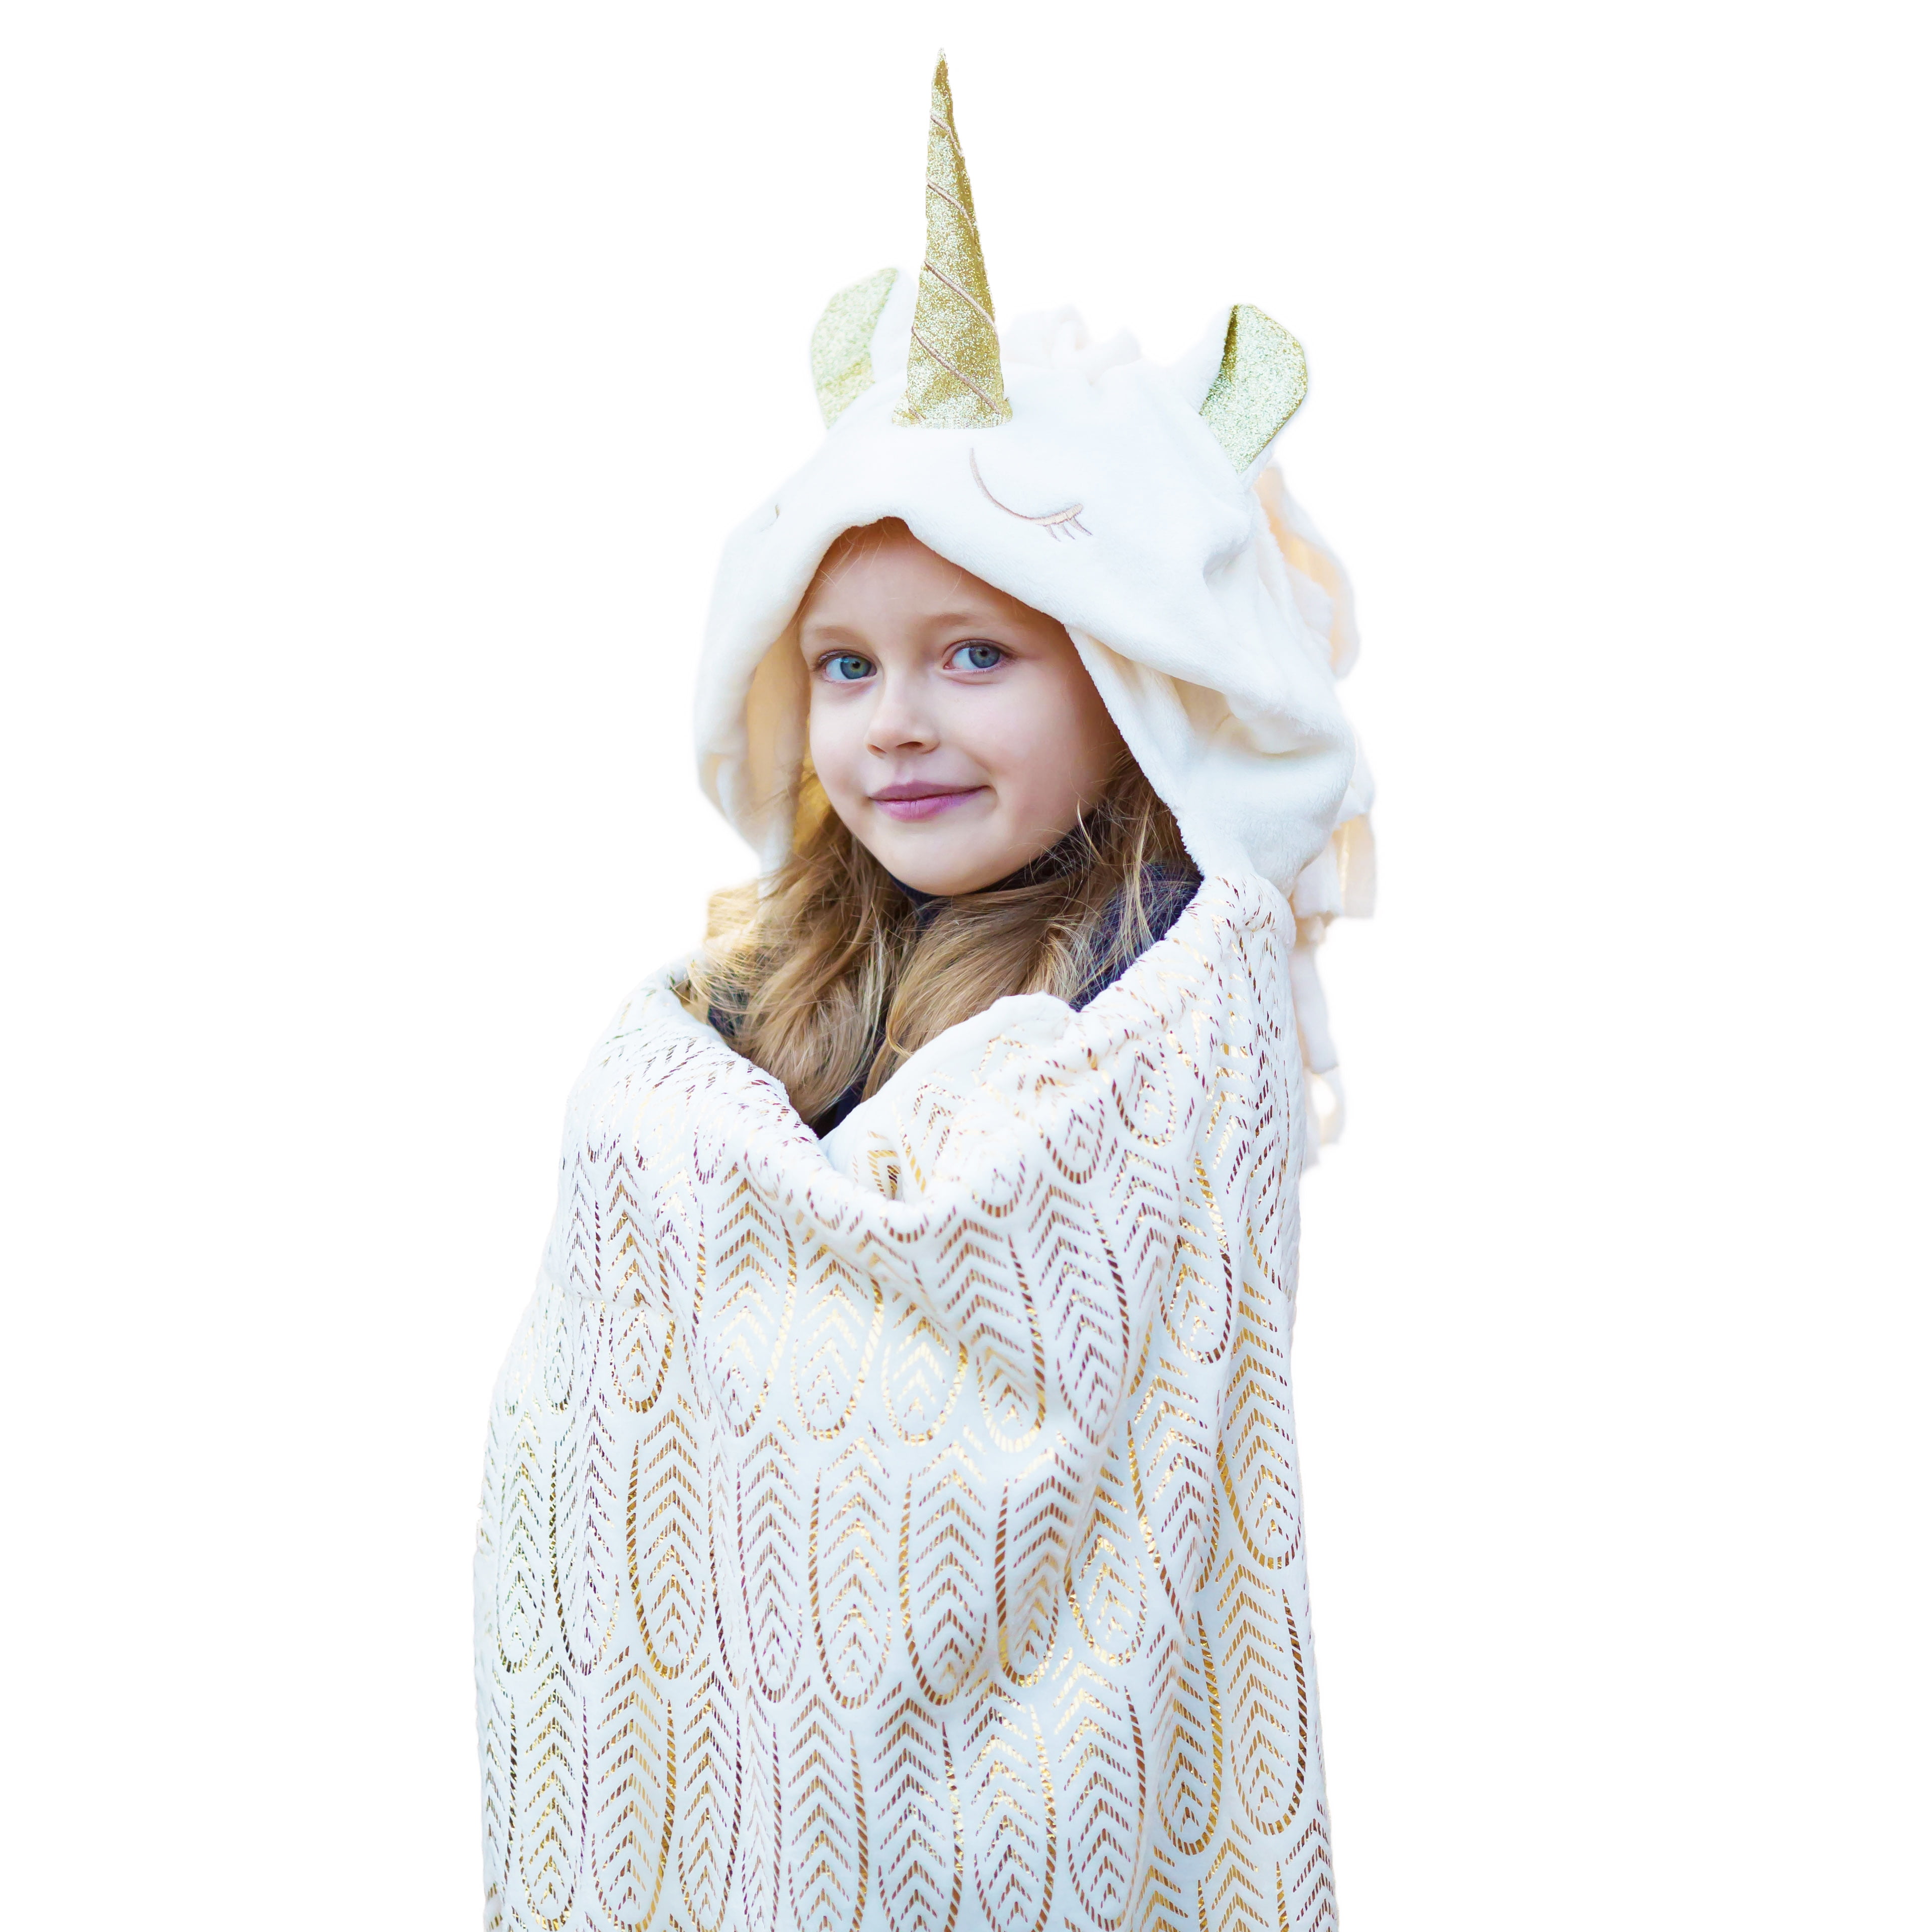 Hooded Unicorn Blanket for Girls & Adults Kids Large Soft Plush Wearable Hoodie Bankets Comfortable Animal Hood Throw Wrap Unicorn Cloak with Shimmering Horn & Gold Foil Design for Play & Sleep 